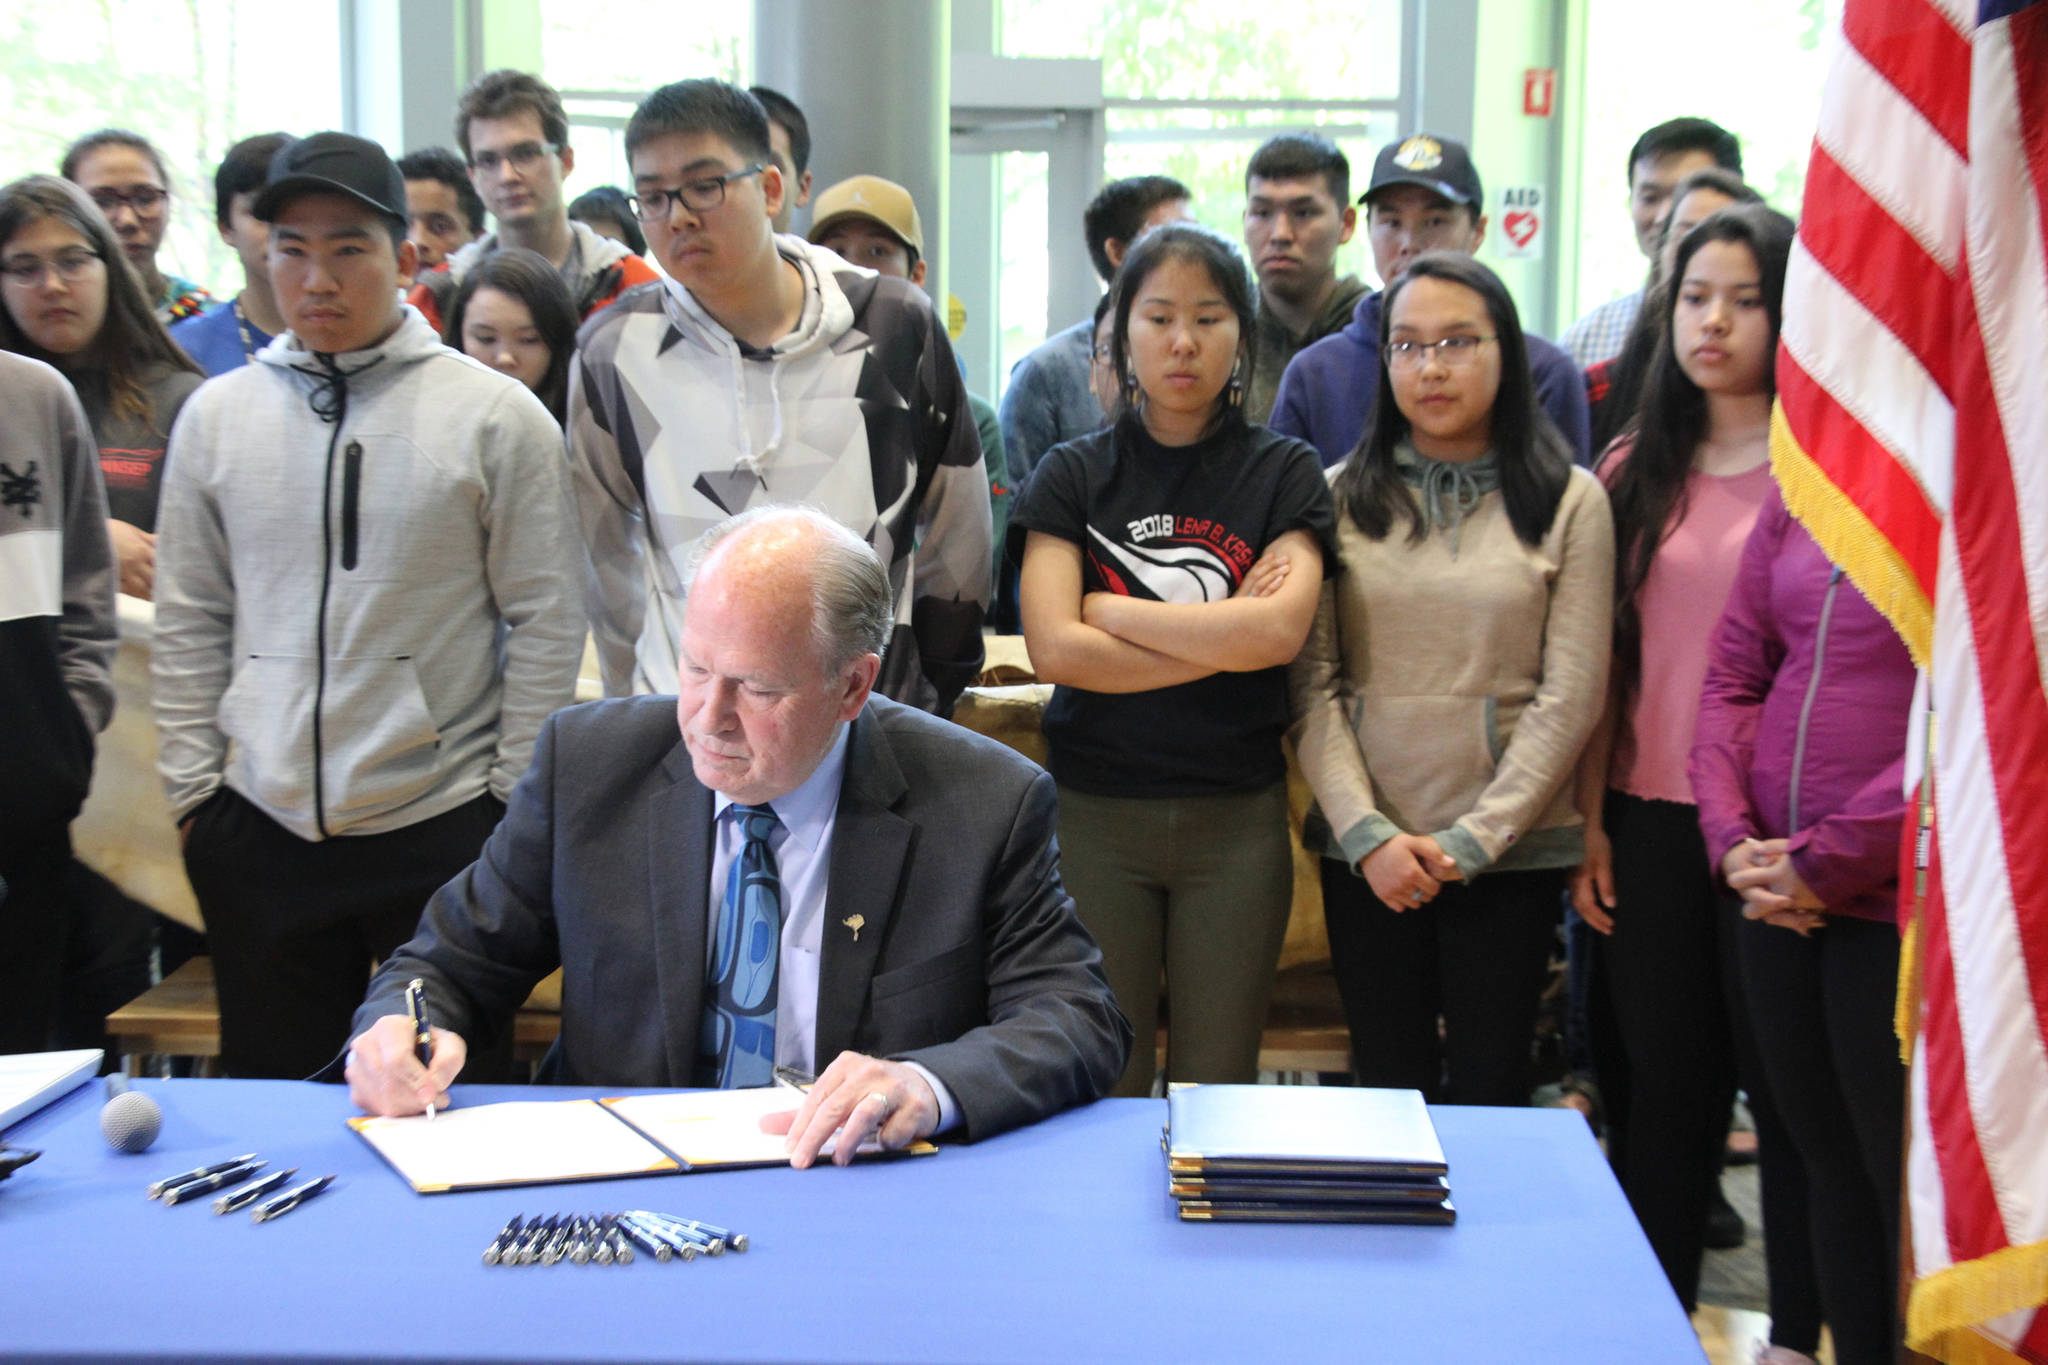 Alaska Gov. Bill Walker signs state spending bills during a ceremony Wednesday at the University of Alaska Anchorage. Walker did perform some line-item vetoes, including rejecting funding for a bridge project that would link Anchorage to the Matanuska-Susitna Borough and a Vitamin D deficiency study. (AP Photo/Mark Thiessen)